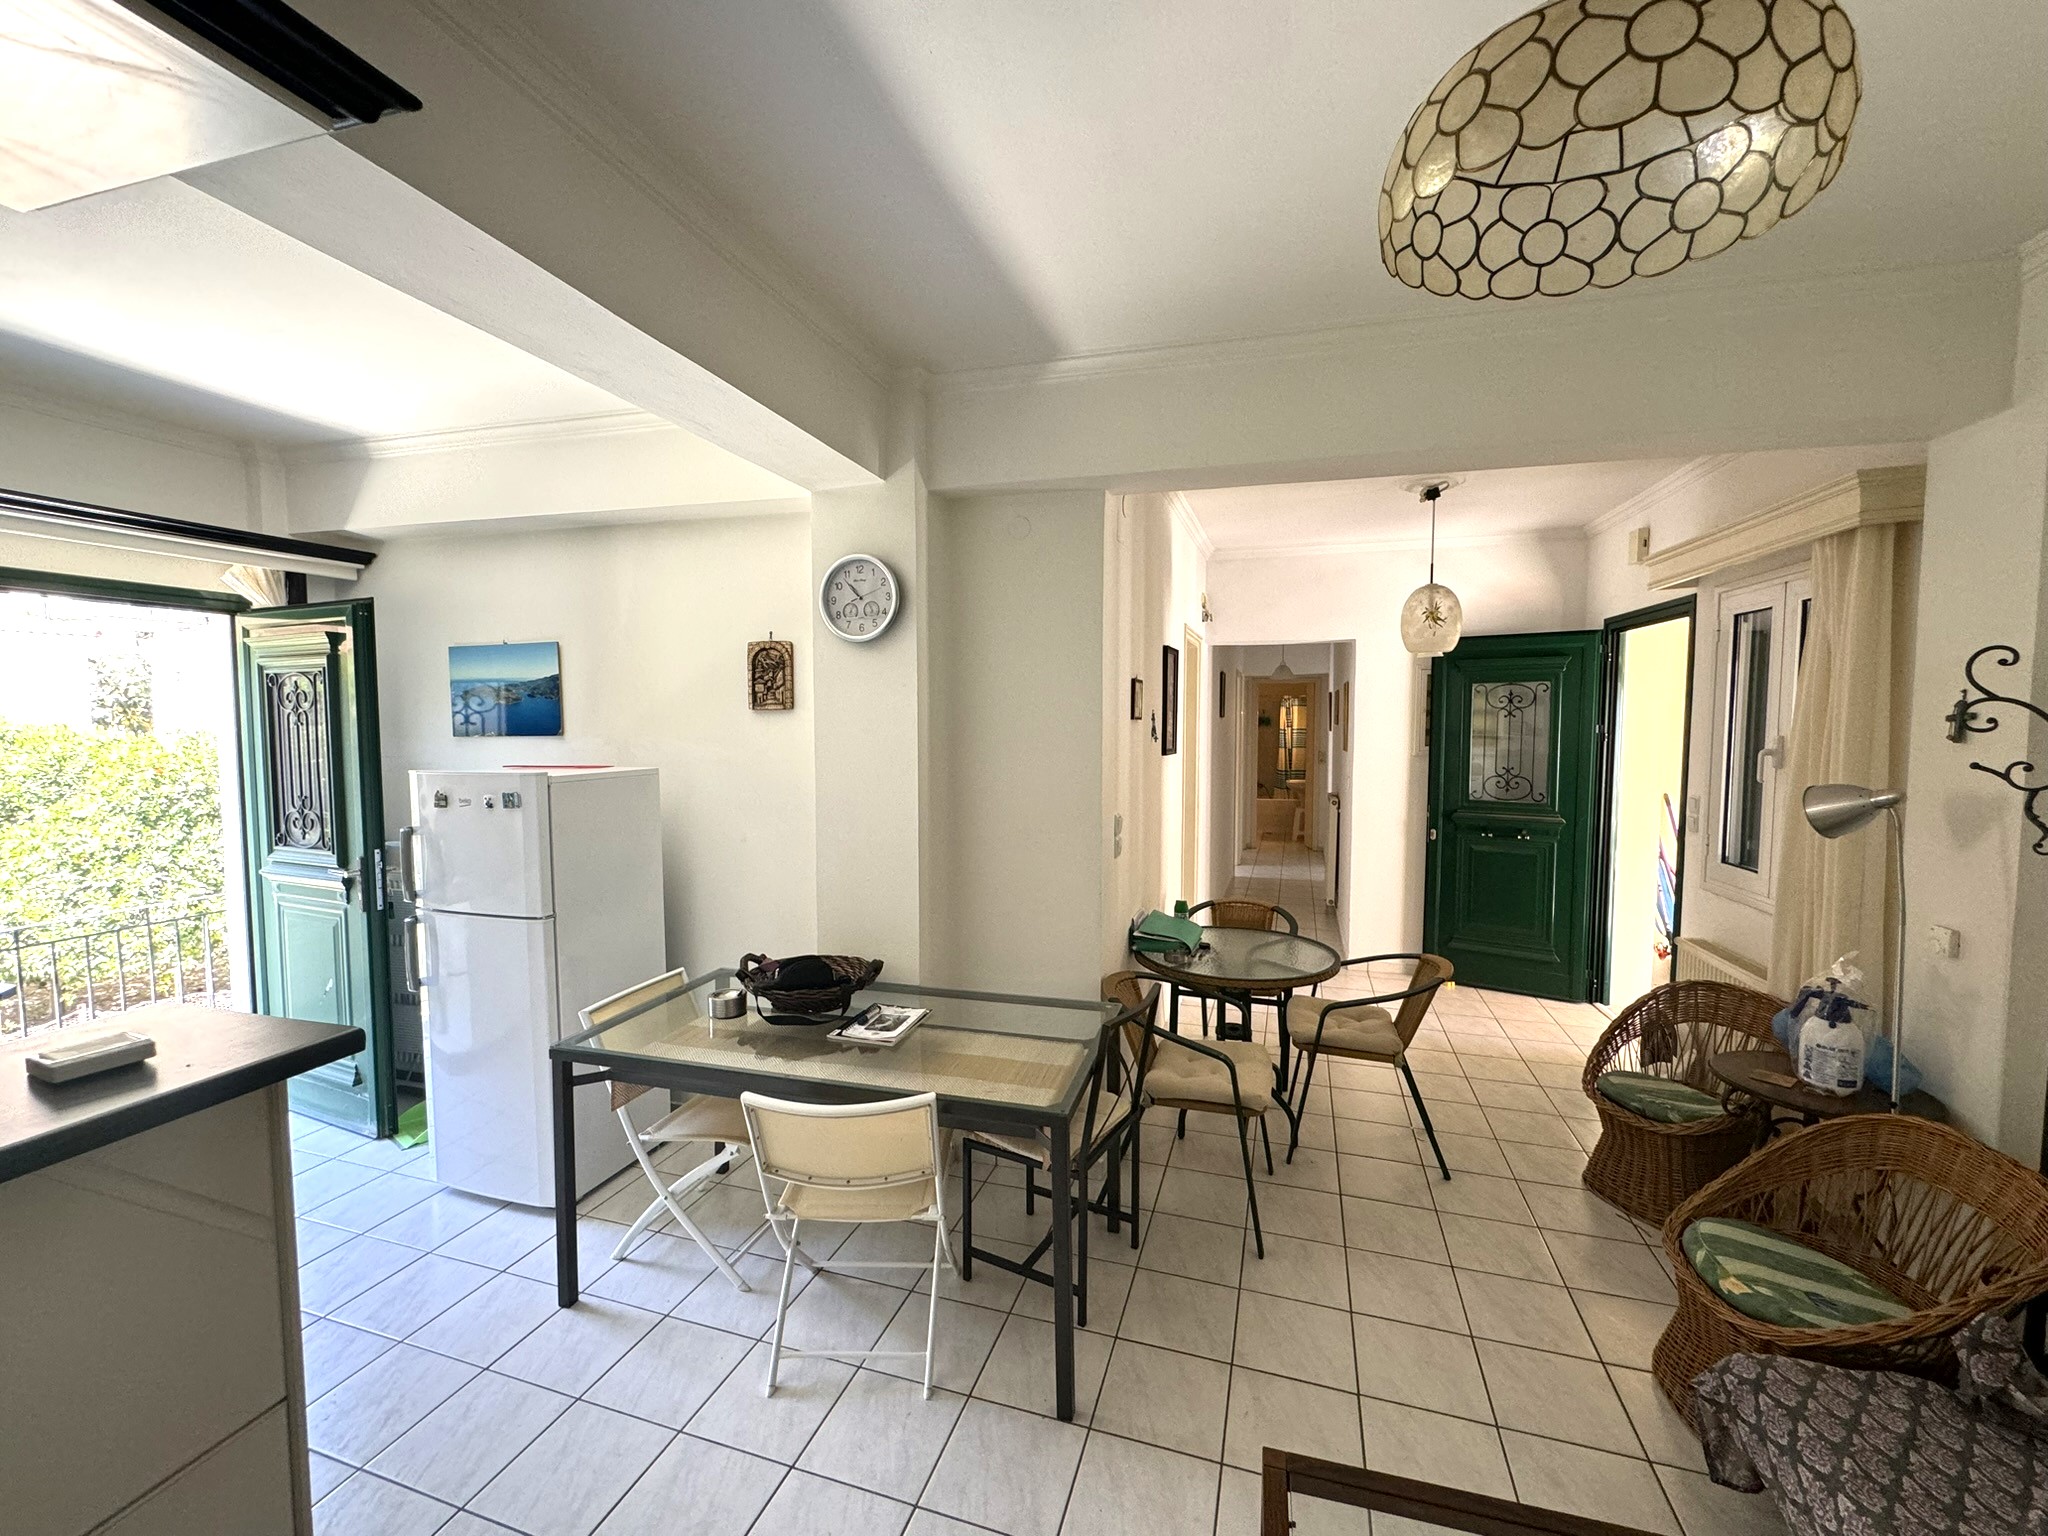 Lounge and kitchen area of house for sale in Ithaca Greece Vathi